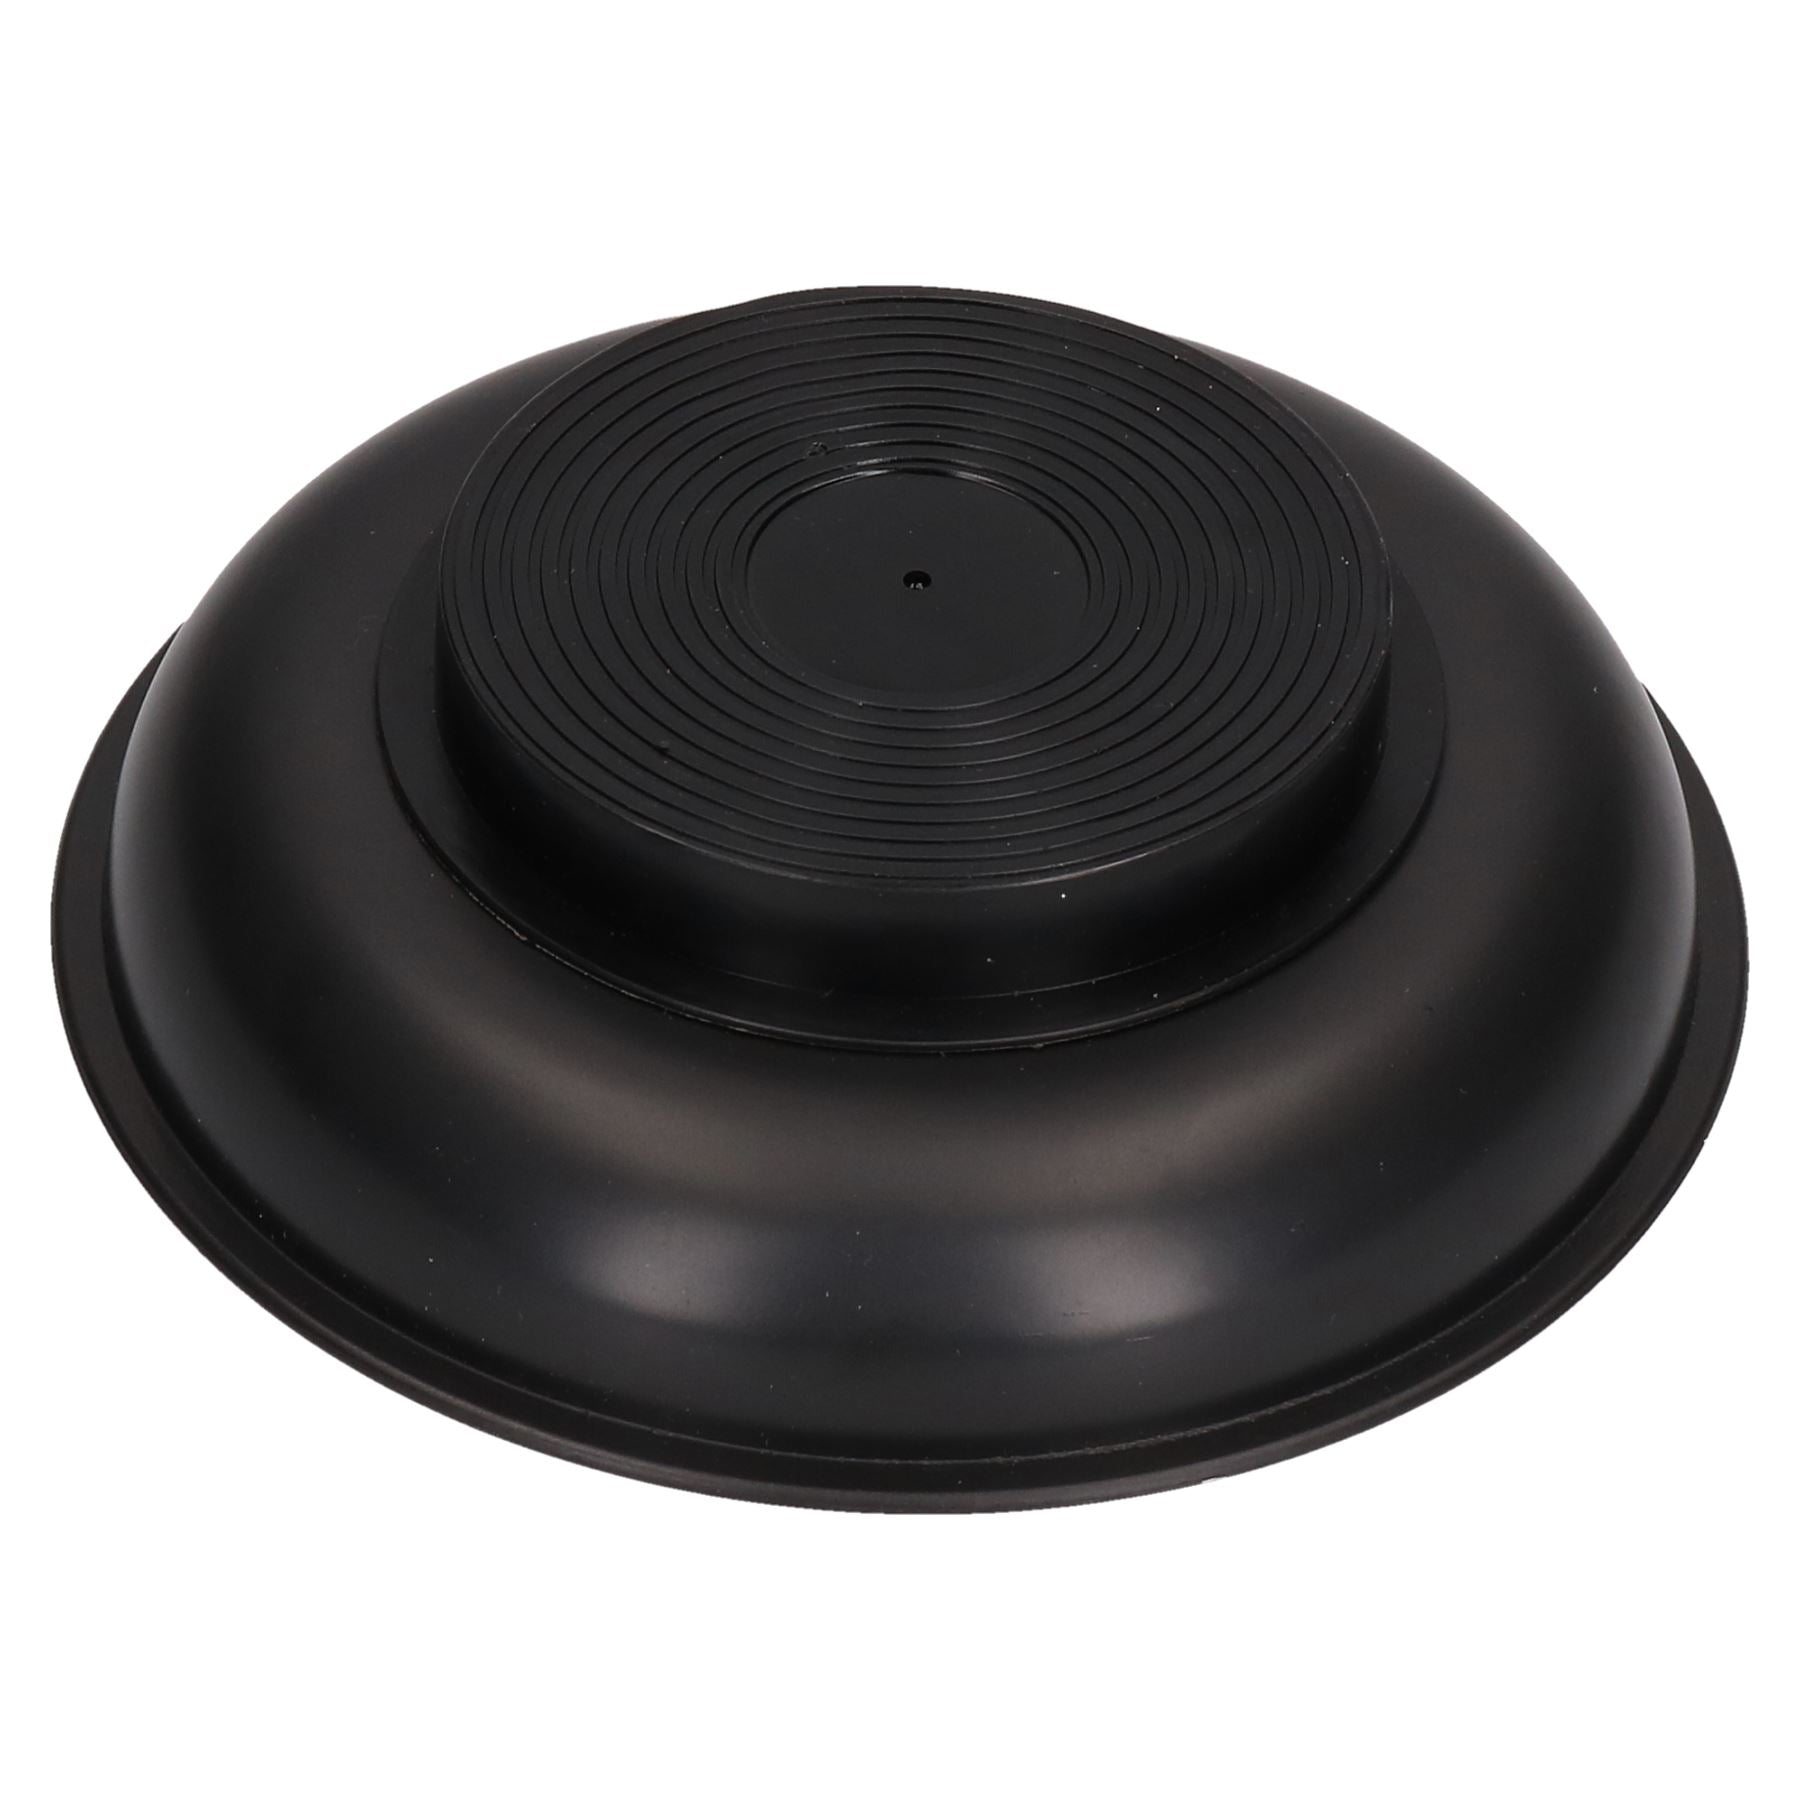 6" Magnetic Parts Tray Dish Storage Holder Circular Round With PVC Coating